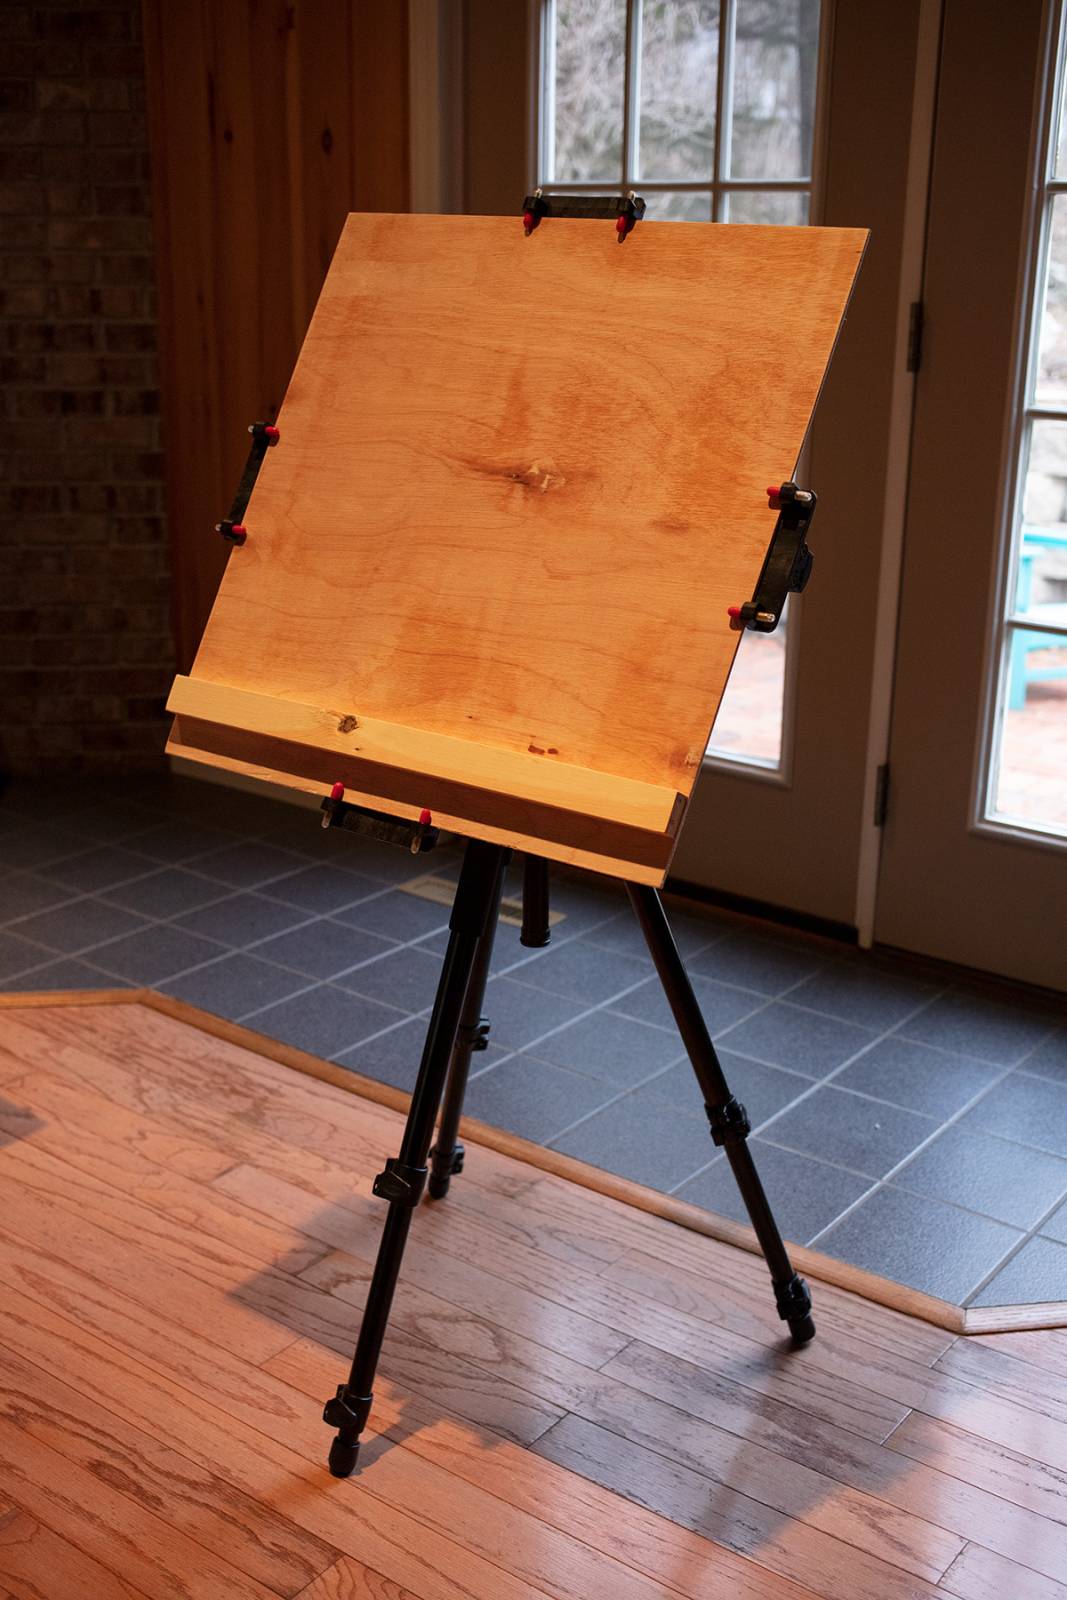 Best Tabletop Easels: Review